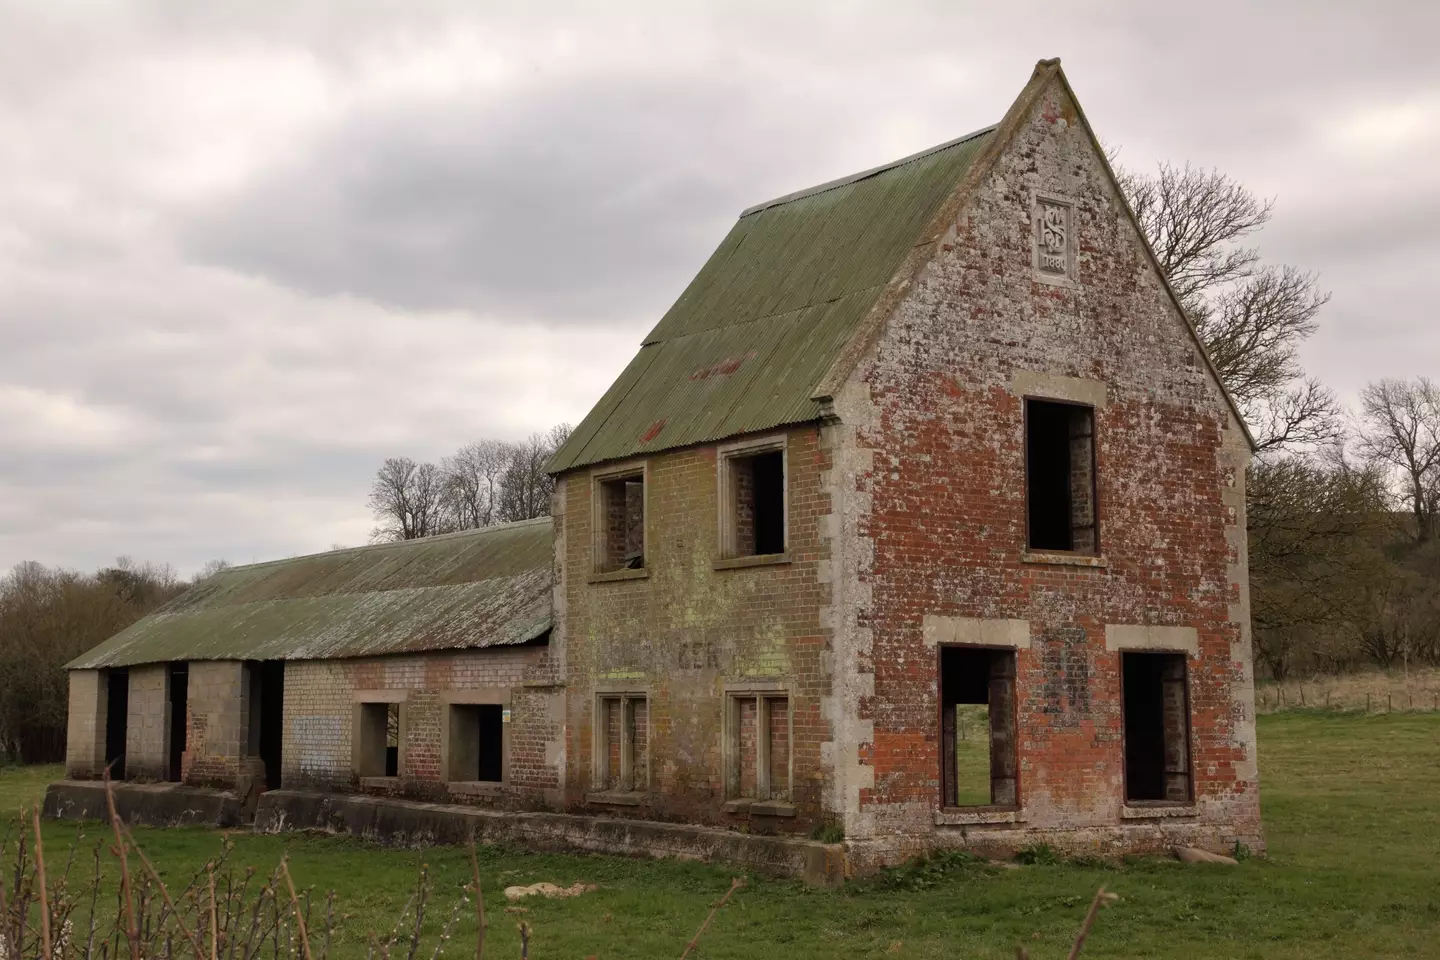 Imber has remained empty for almost 80 years.